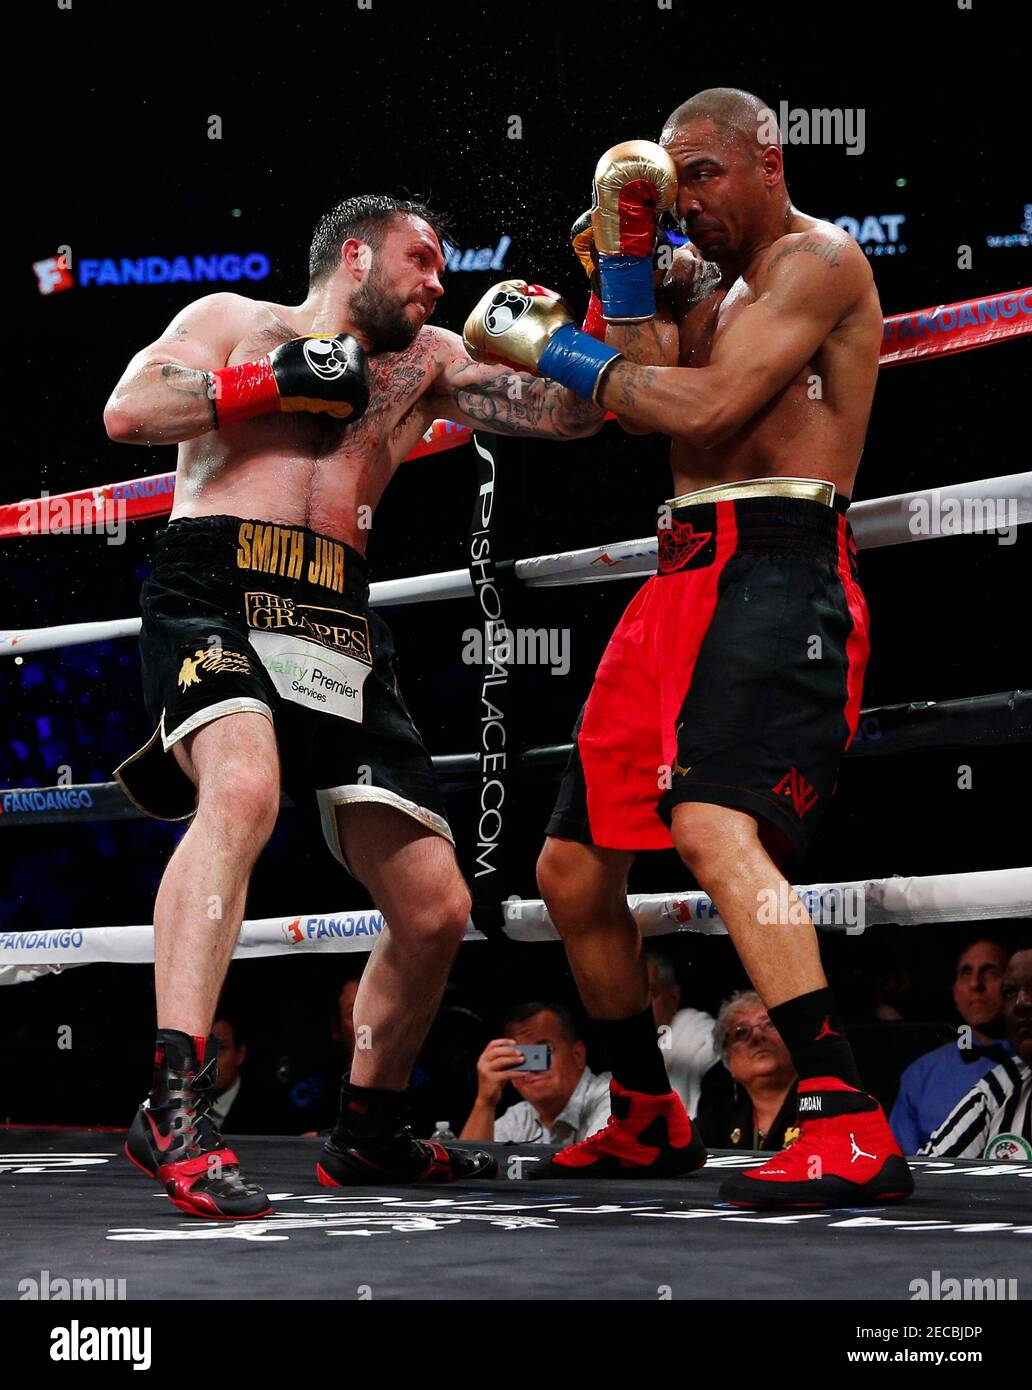 Boxing - Andre Ward v Paul Smith - Oracle Arena, Oakland, California,  United States of America - 20/6/15 Andre Ward in action against Paul Smith  Action Images via Reuters / Andrew Couldridge Stock Photo - Alamy